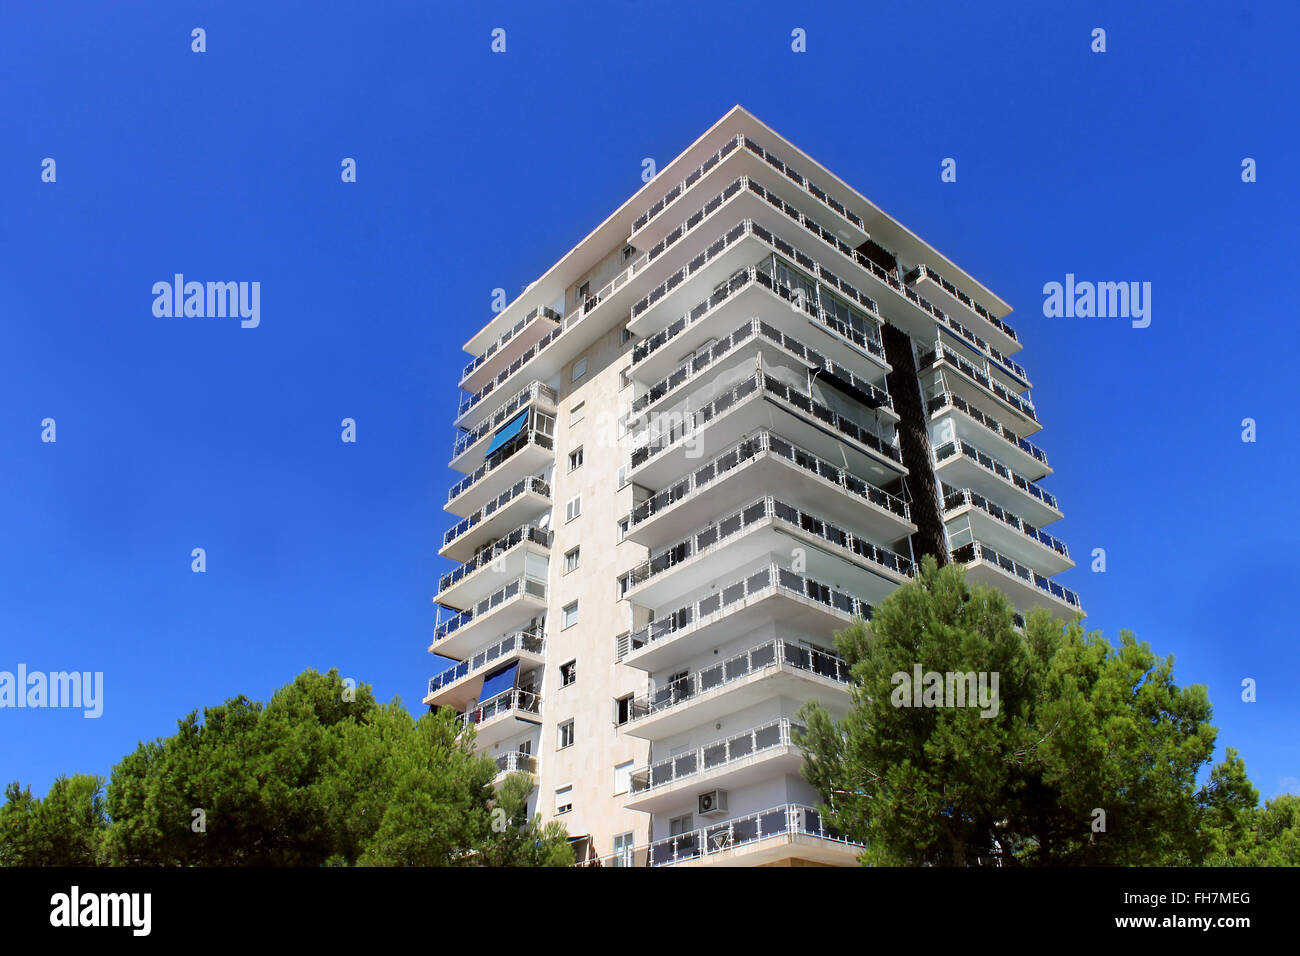 Exterior of a tall modern apartment building with blue sky background. Stock Photo